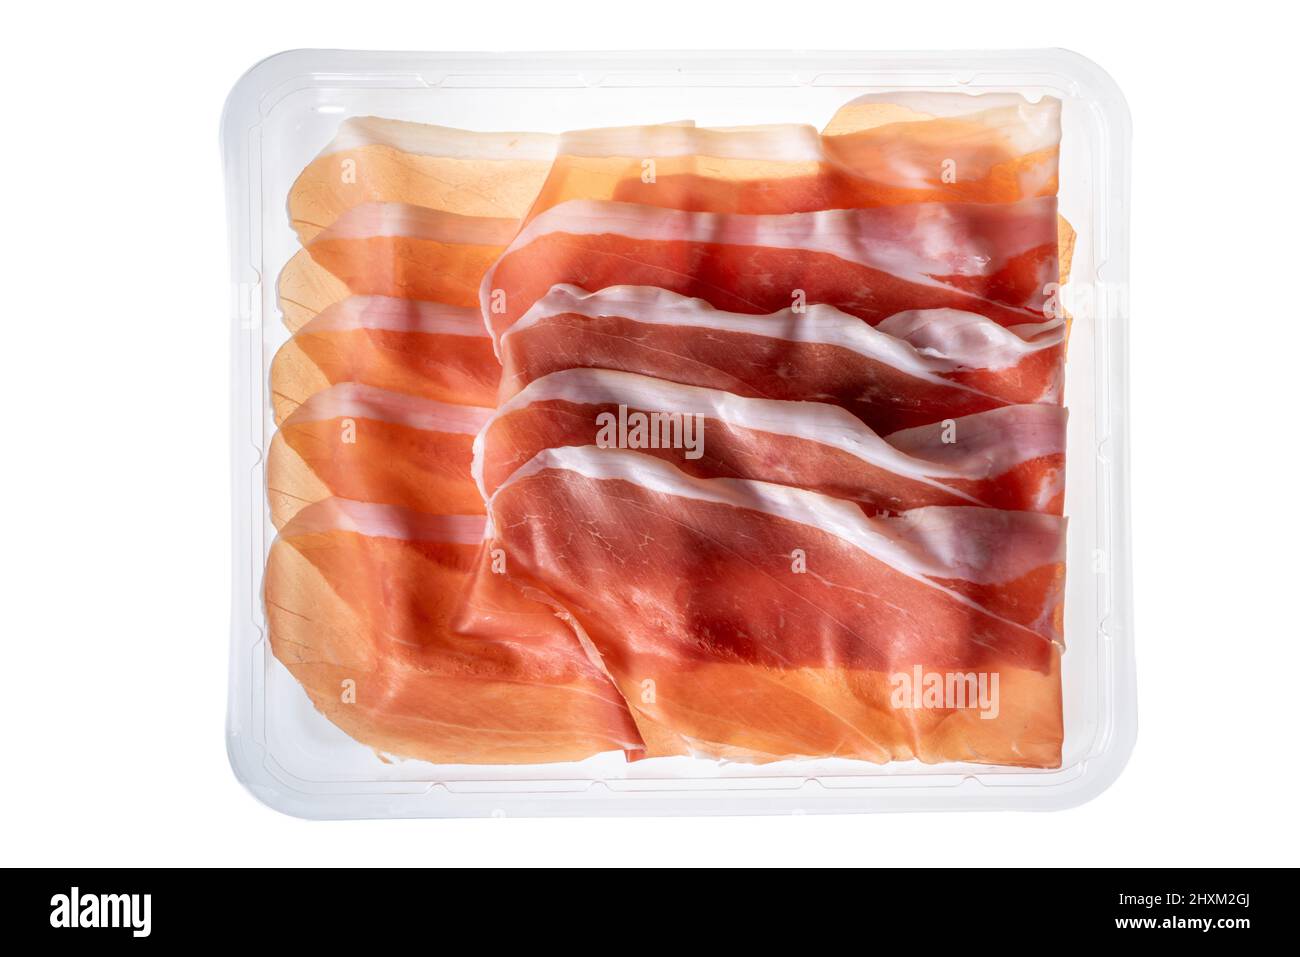 Sliced Parma ham in plastic tray for sale in supermarket, clipping path, top view Stock Photo